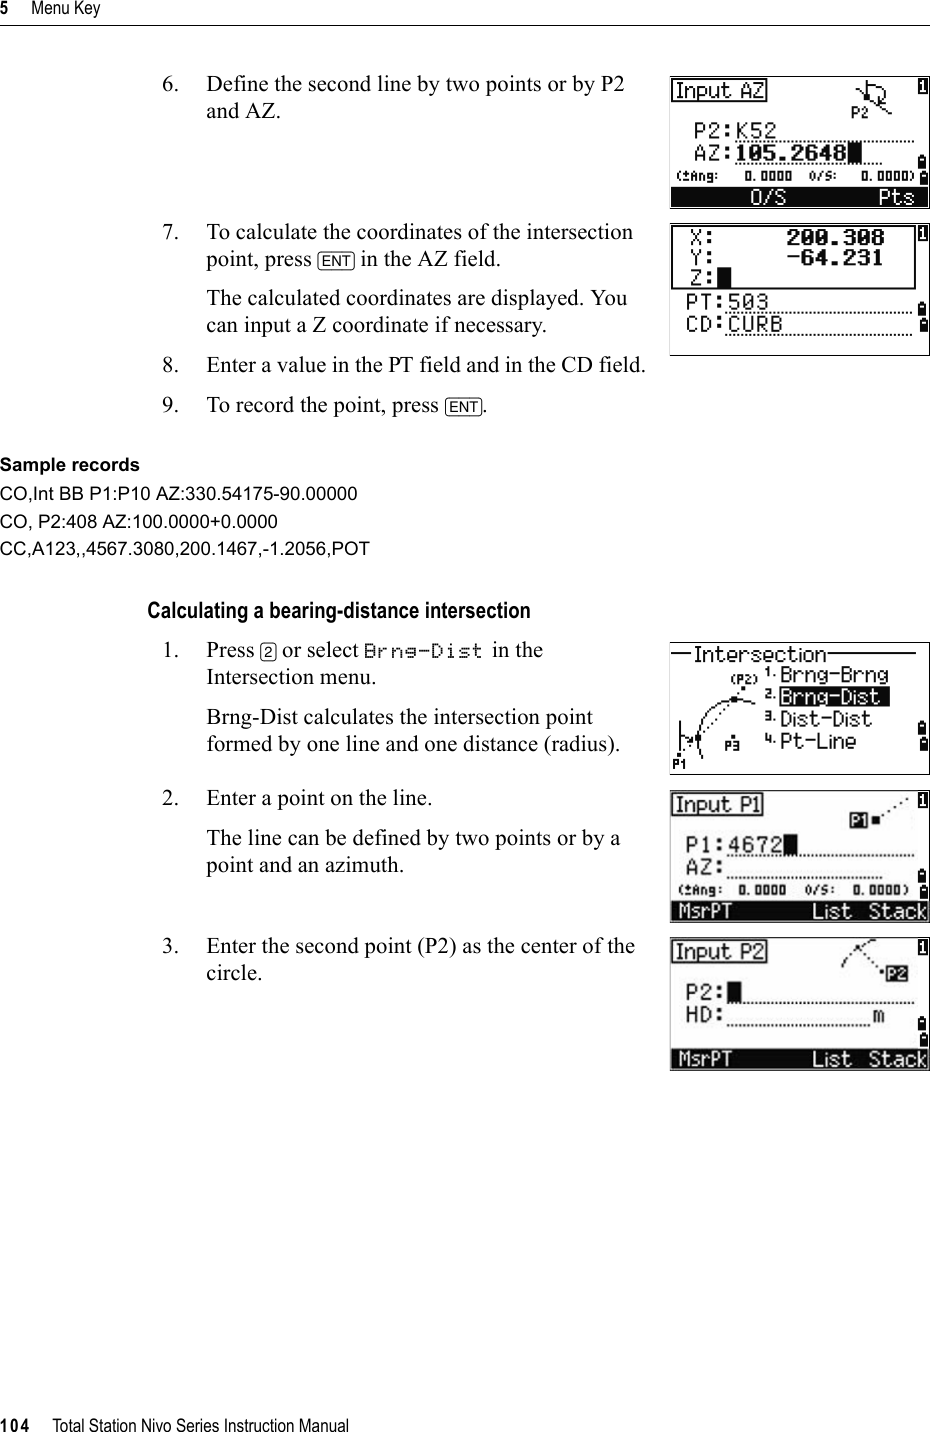 5     Menu Key104     Total Station Nivo Series Instruction Manual6. Define the second line by two points or by P2 and AZ.7. To calculate the coordinates of the intersection point, press [ENT] in the AZ field. The calculated coordinates are displayed. You can input a Z coordinate if necessary.8. Enter a value in the PT field and in the CD field. 9. To record the point, press [ENT].Sample recordsCO,Int BB P1:P10 AZ:330.54175-90.00000CO, P2:408 AZ:100.0000+0.0000CC,A123,,4567.3080,200.1467,-1.2056,POTCalculating a bearing-distance intersection1. Press [2] or select Brng-Dist in the Intersection menu.Brng-Dist calculates the intersection point formed by one line and one distance (radius).2. Enter a point on the line.The line can be defined by two points or by a point and an azimuth.3. Enter the second point (P2) as the center of the circle.